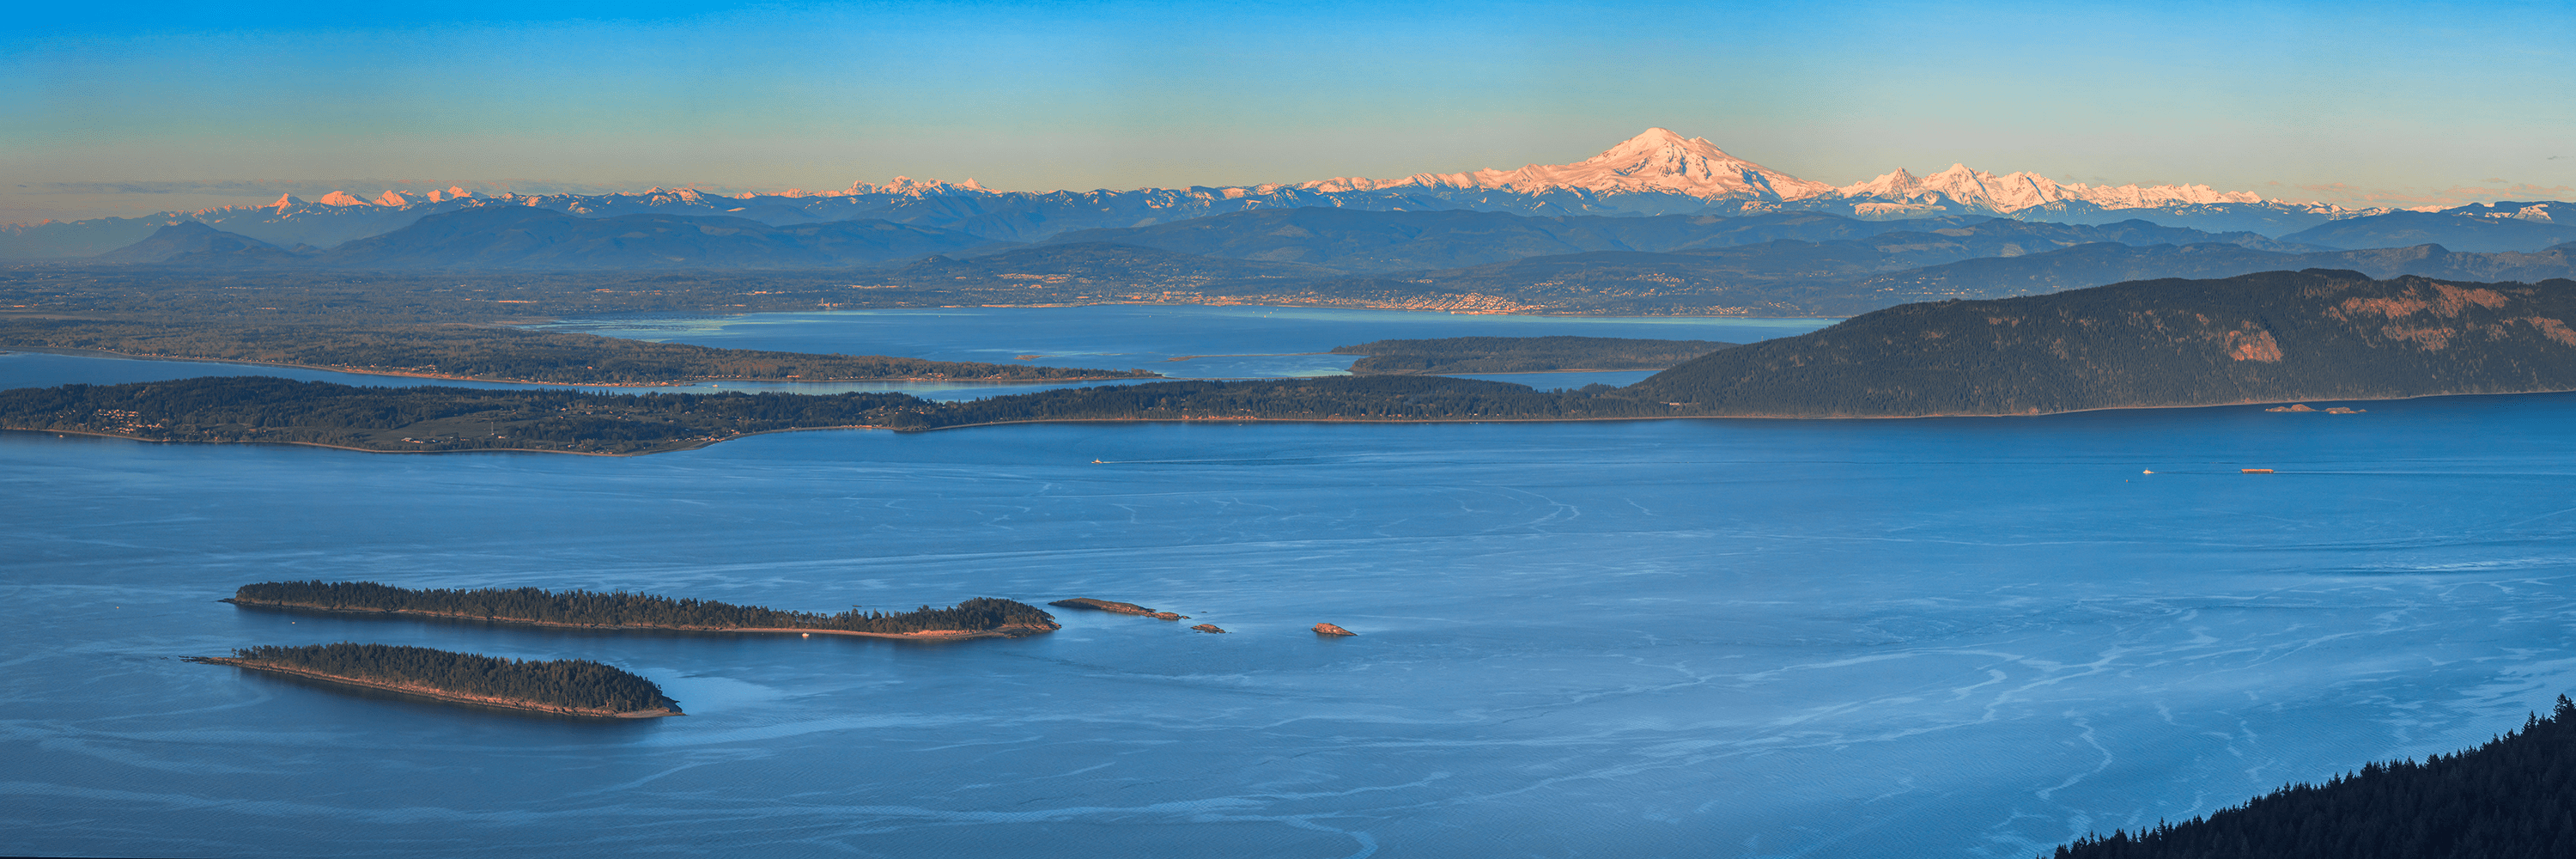 From above image of San Juan Islands, the sea and mountain range in distance